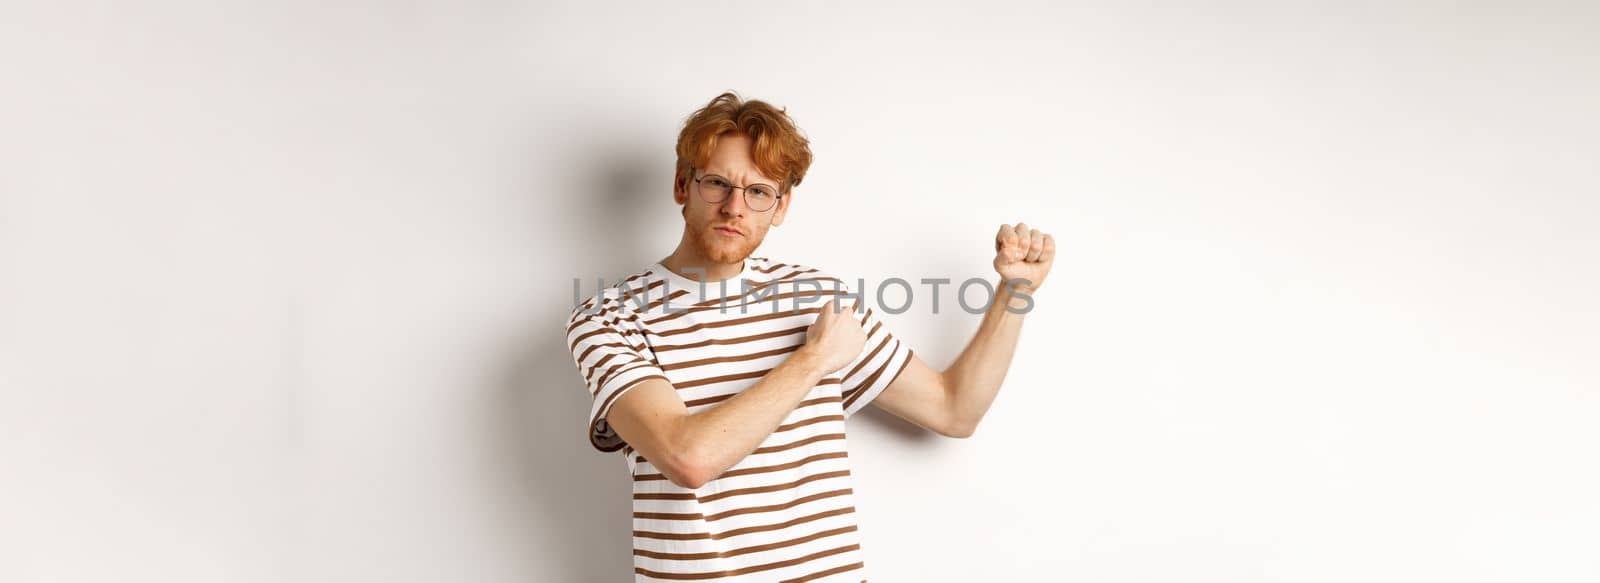 Serious and confident redhead man in glasses raising fists, ready for fight, staring angry at camera while shadow boxing, standing over white background.